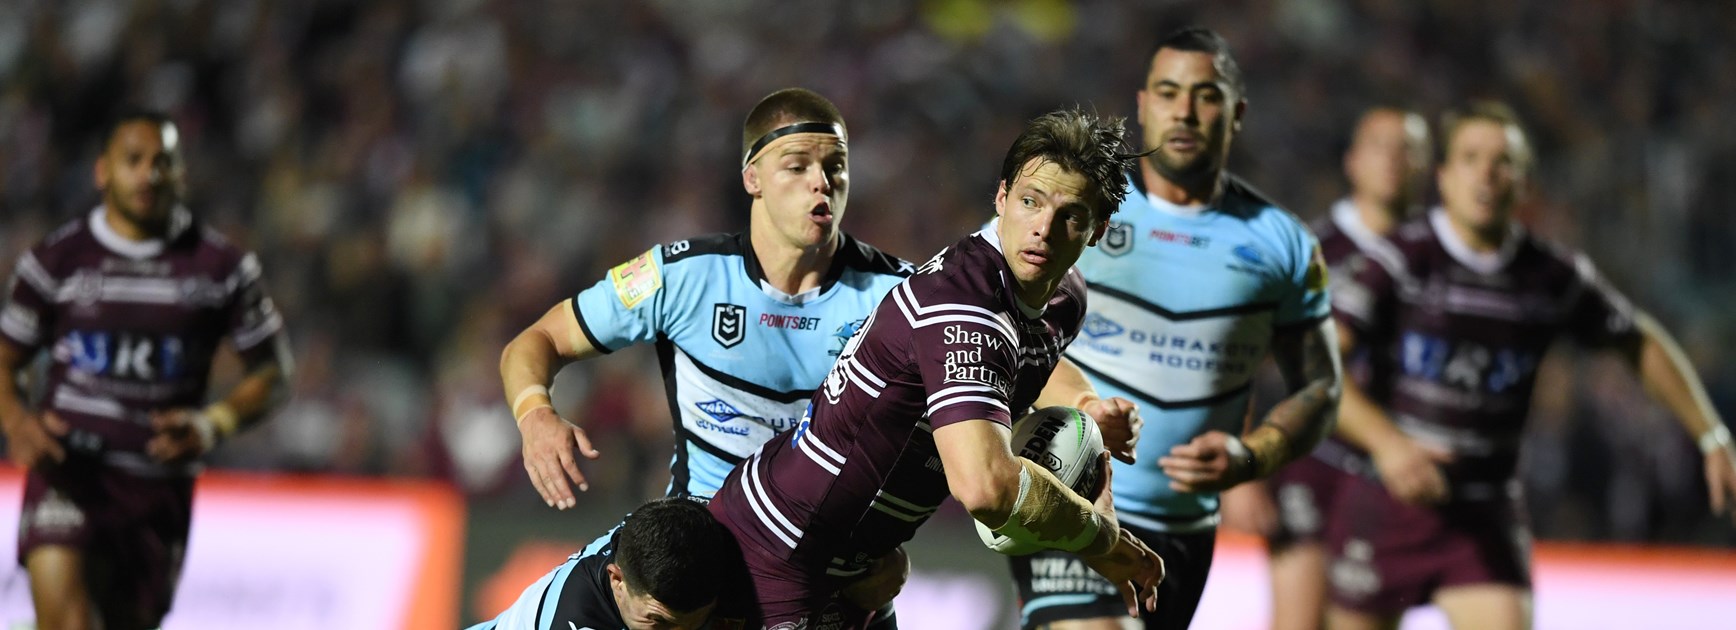 Sharks v Sea Eagles: Williams grabs Sharks No.13; Manly's Turbo boost